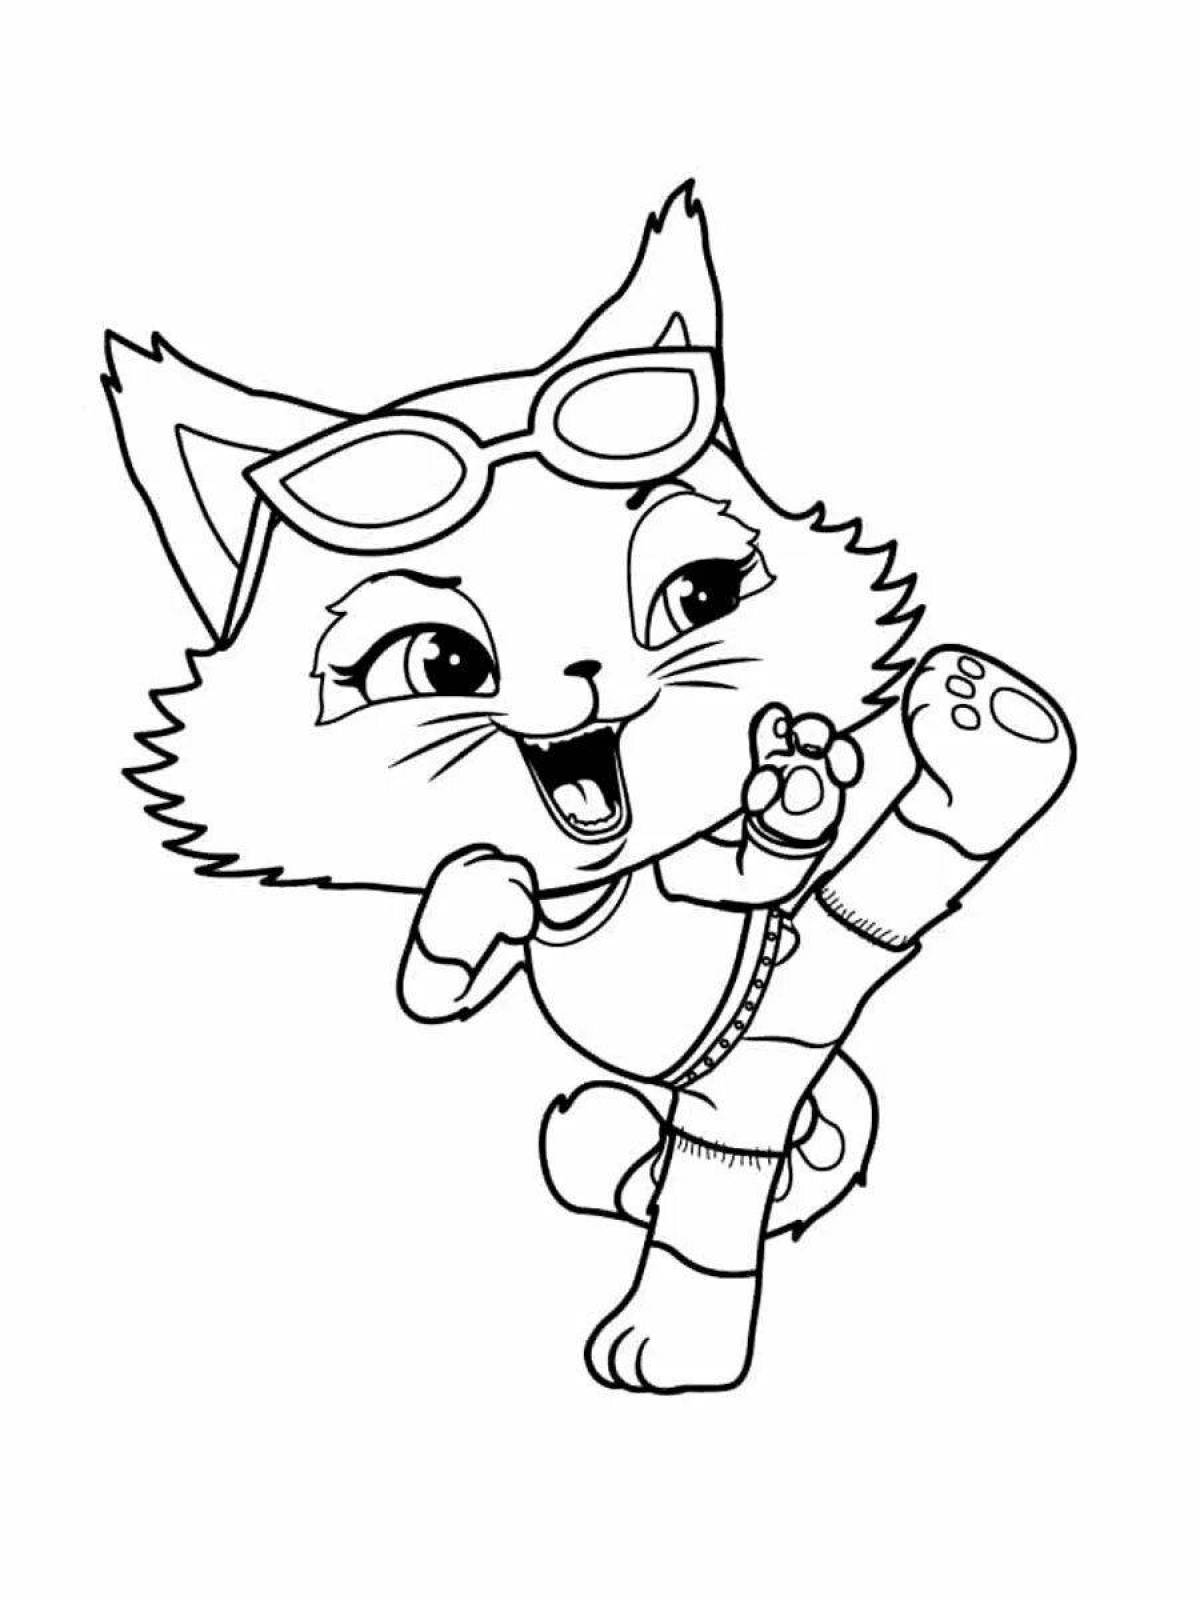 Coloring page dazzling mrr meow